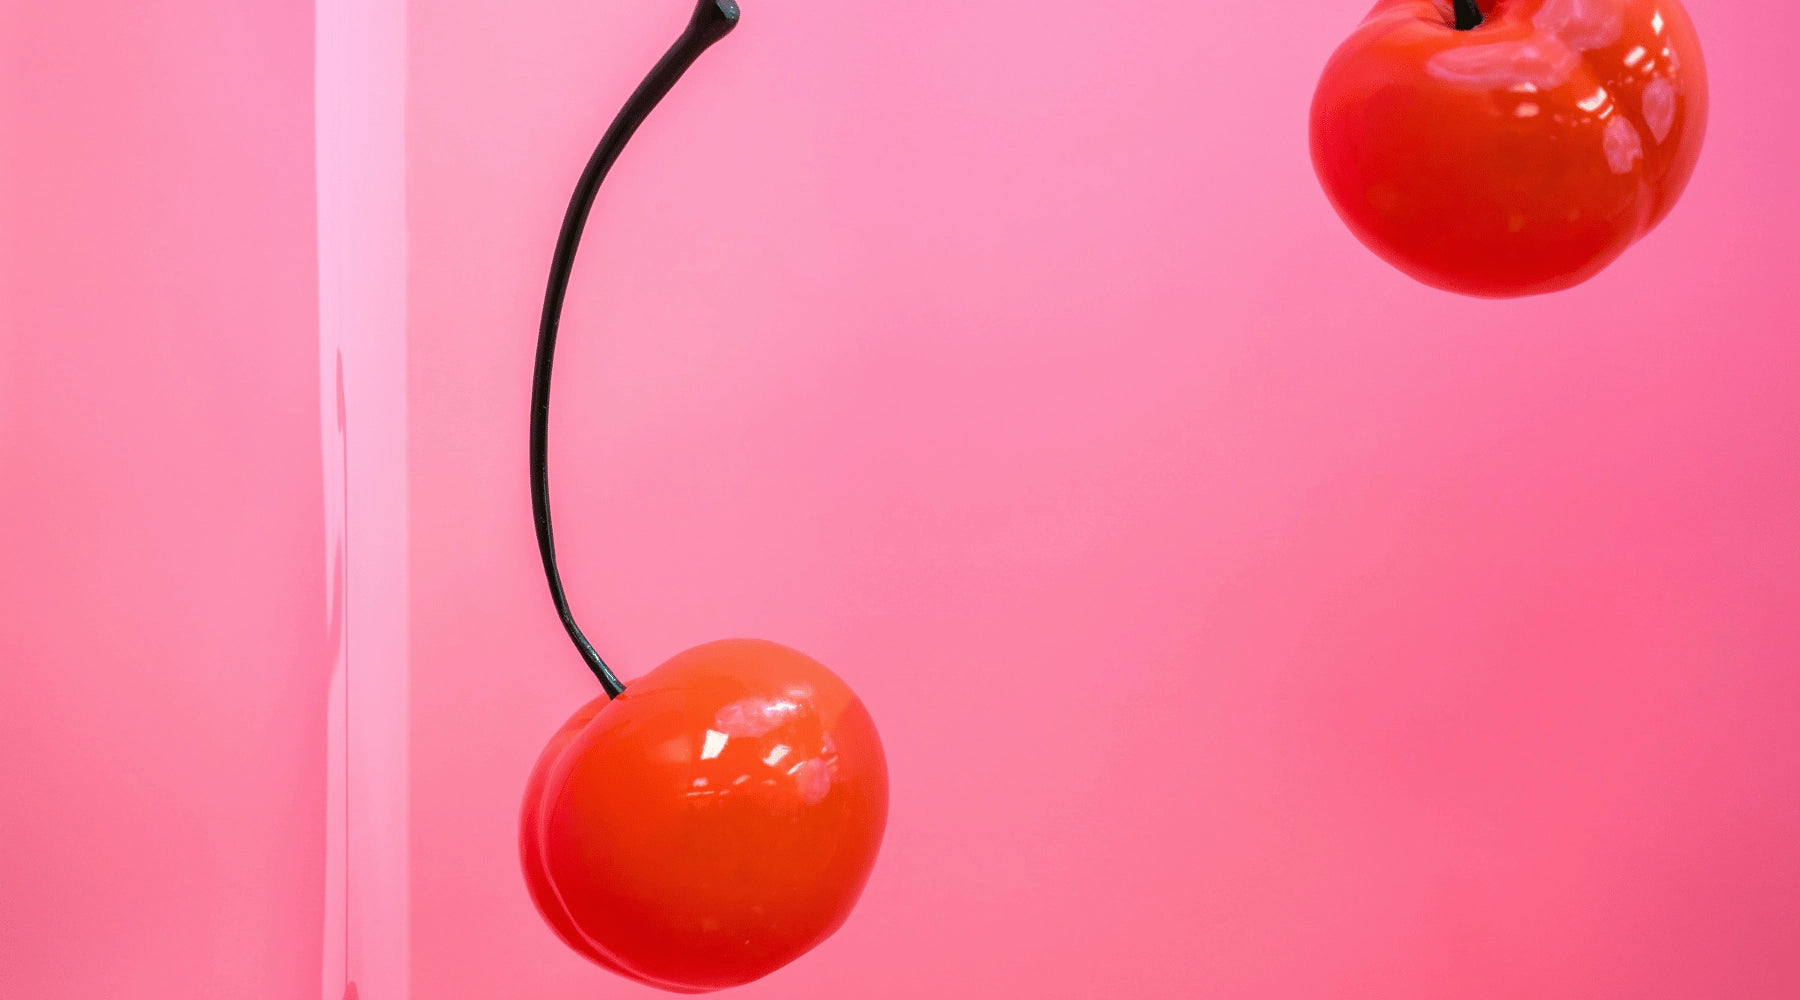 Why are cherries so sexual?